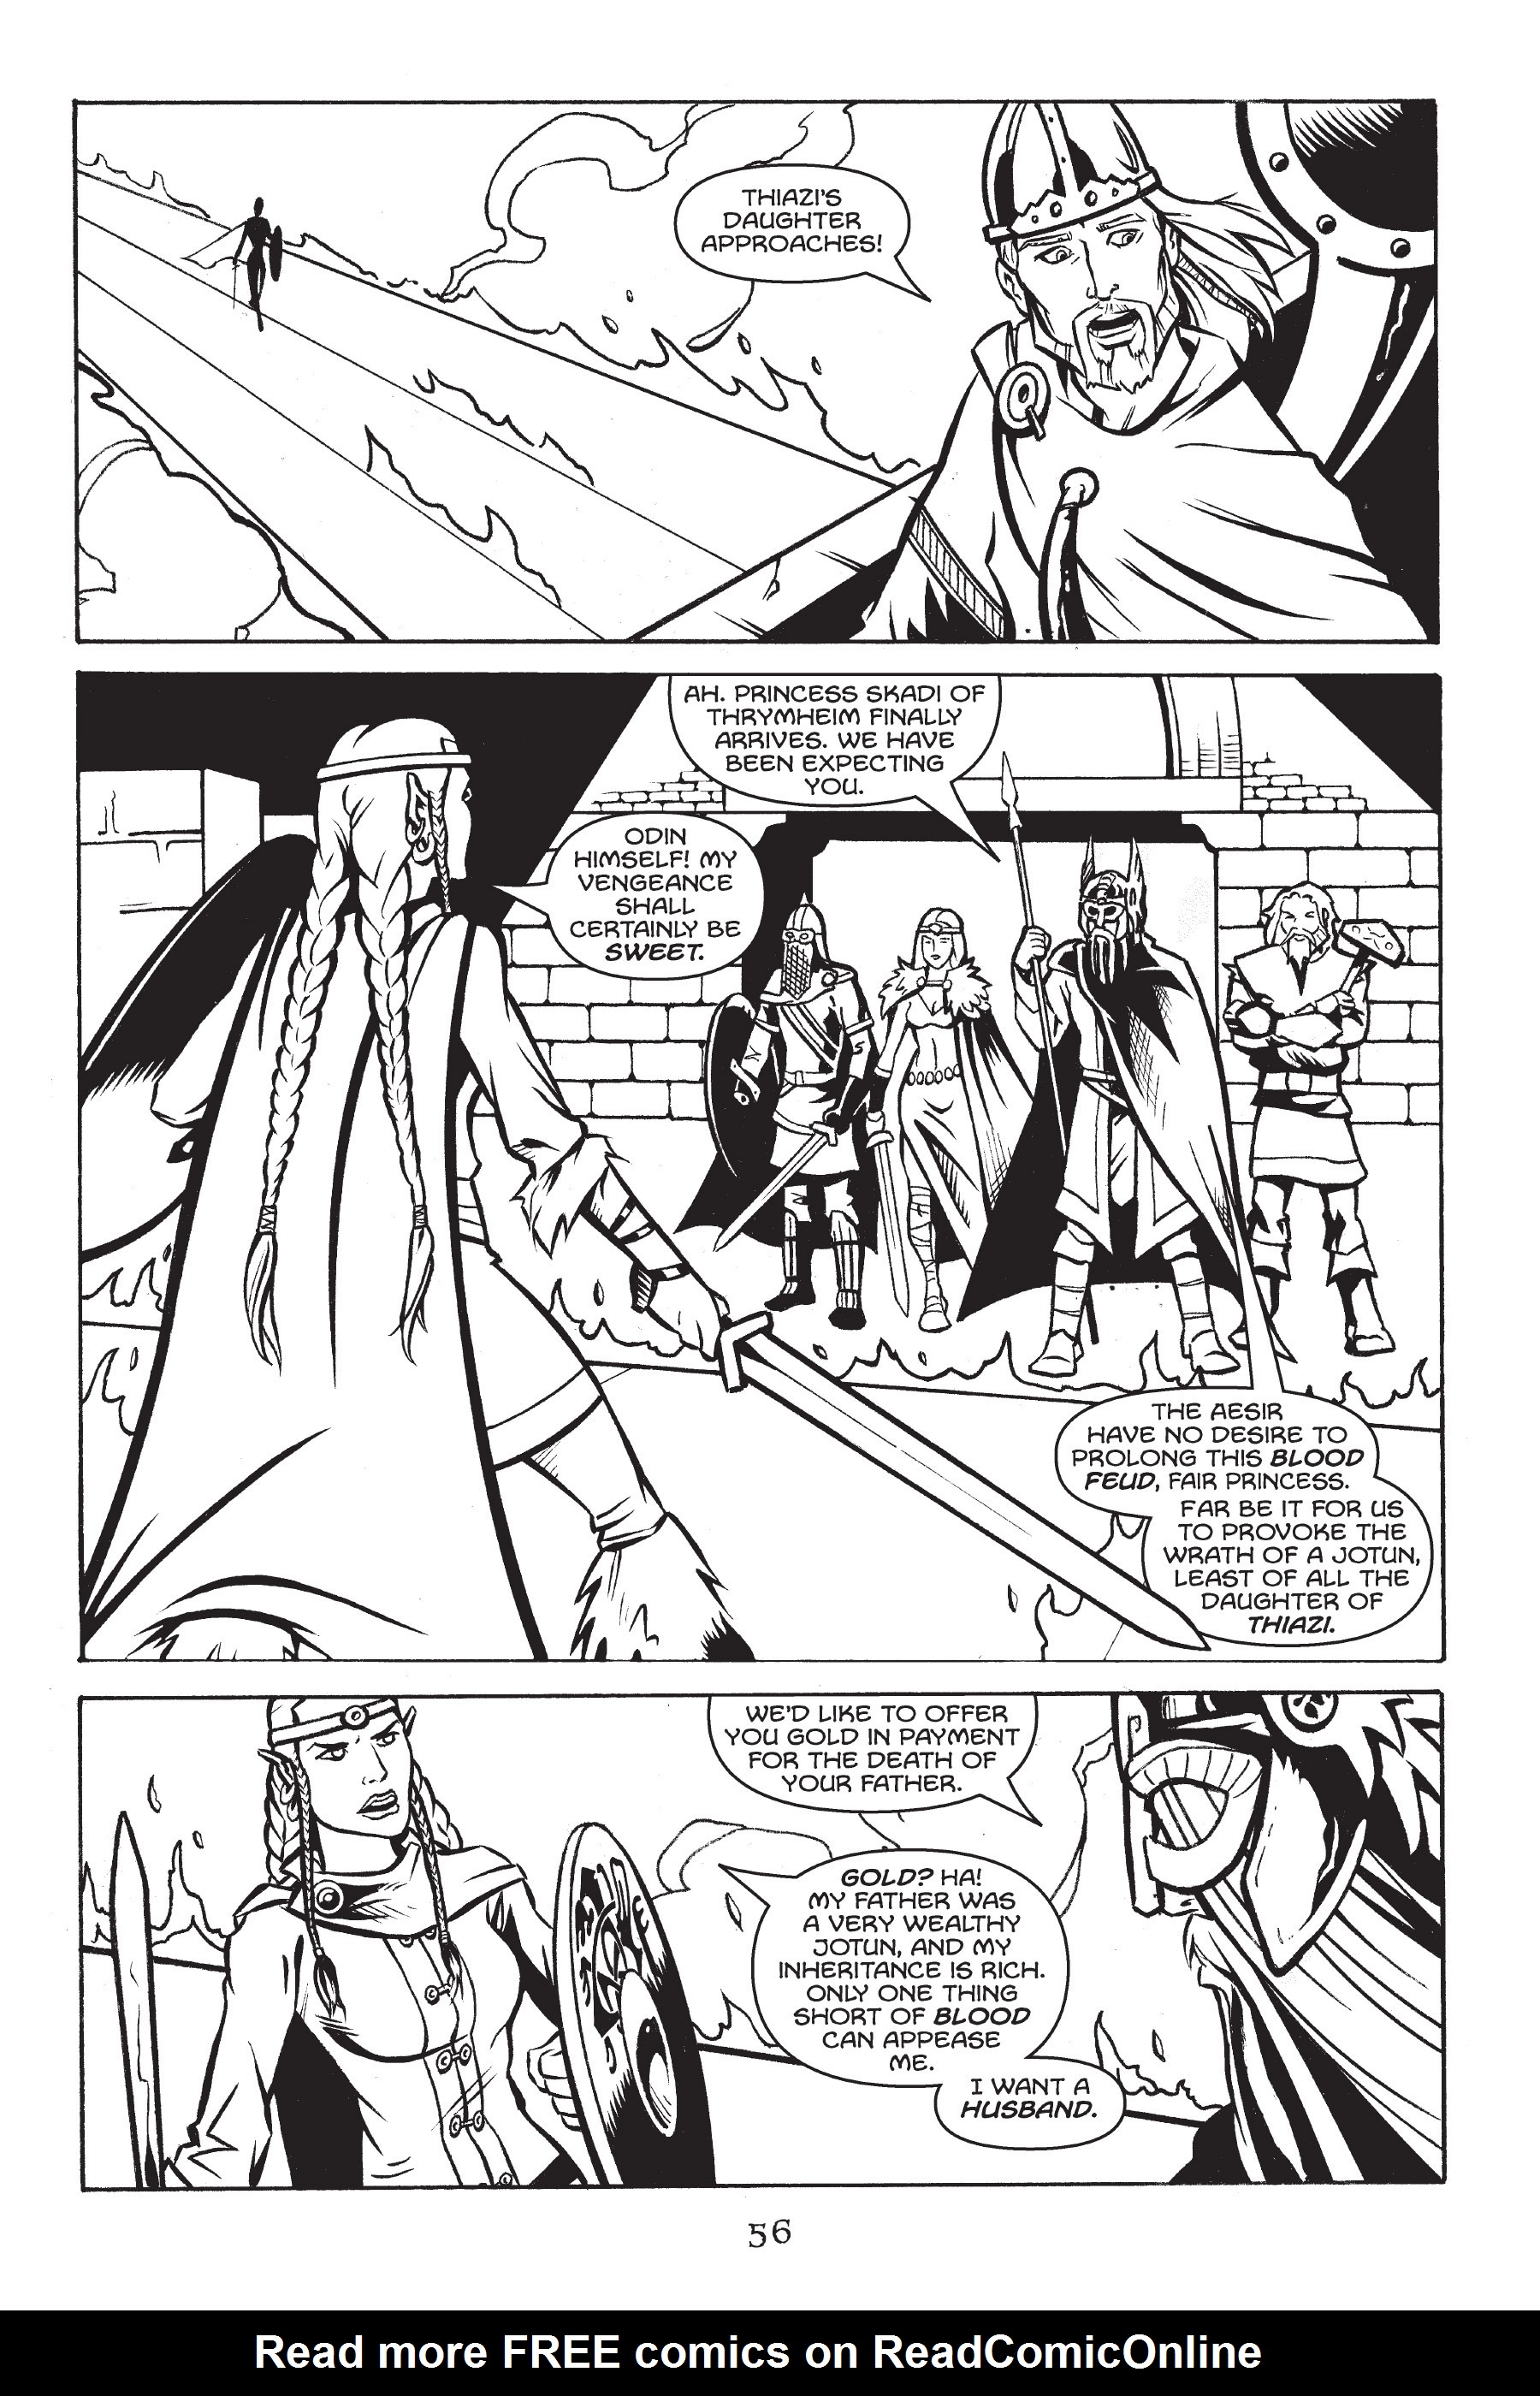 Read online Gods of Asgard comic -  Issue # TPB (Part 1) - 57